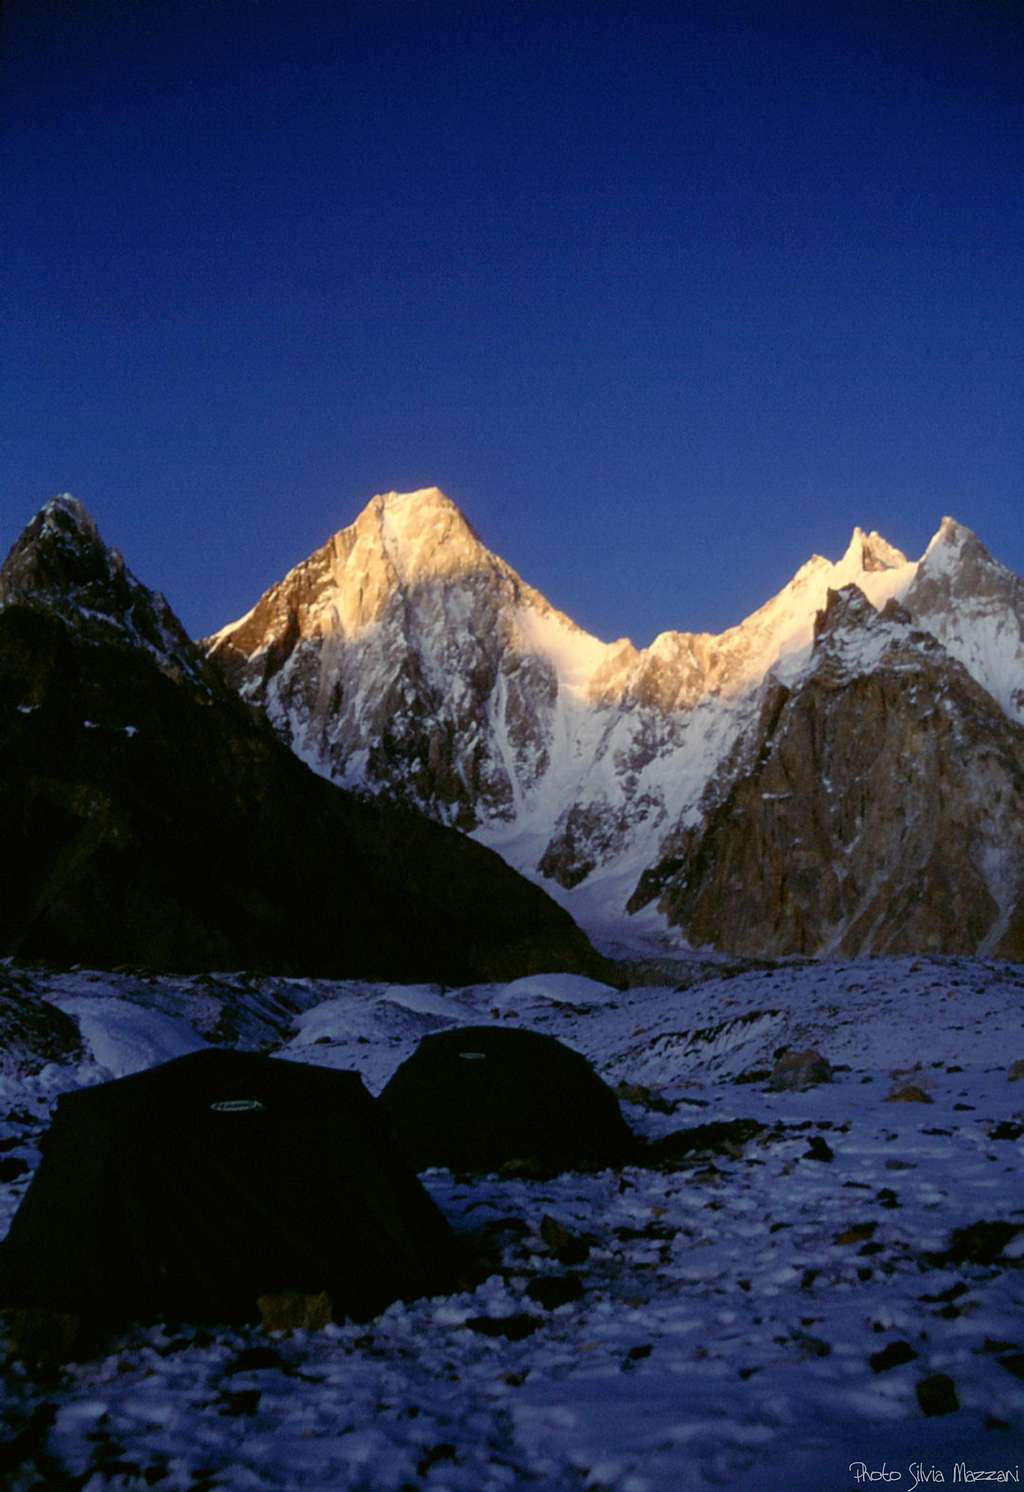 Sunset on Gasherbrum IV, one of the finest peak in the world